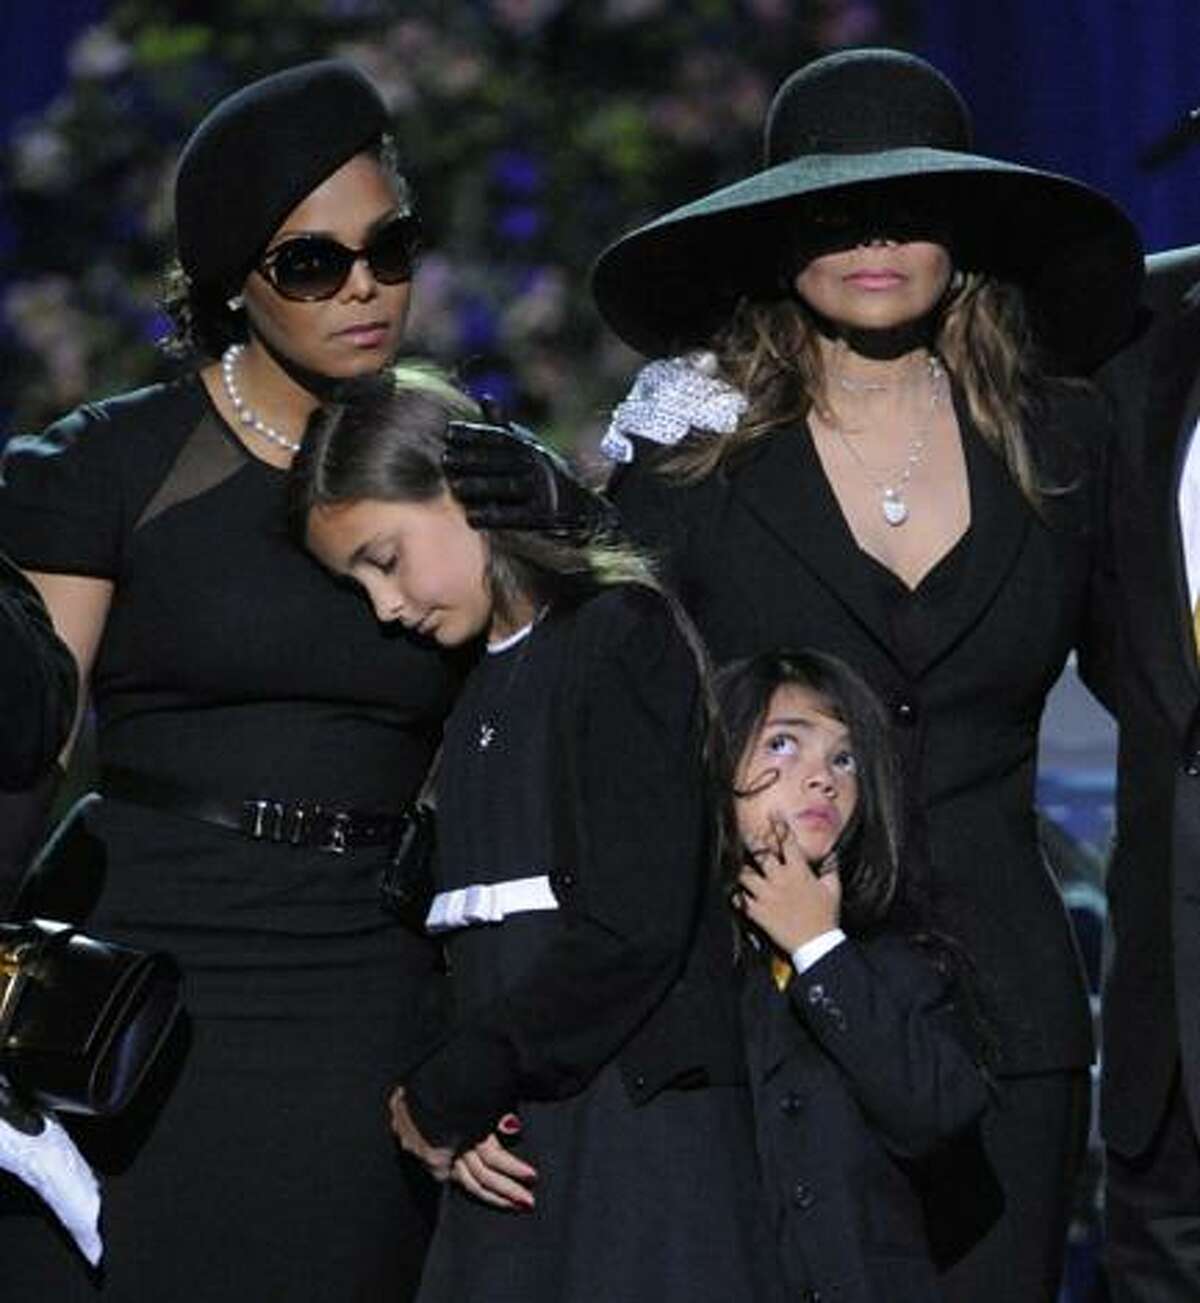 Singer Janet Jackson, left, Paris Katherine Jackson, Prince Michael Jackson II, and LaToya Jackson are seen on stage during the memorial service for Michael Jackson at the Staples Center in Los Angeles, Tuesday, July 7, 2009. (AP Photo/Mark J. Terrill, Pool)